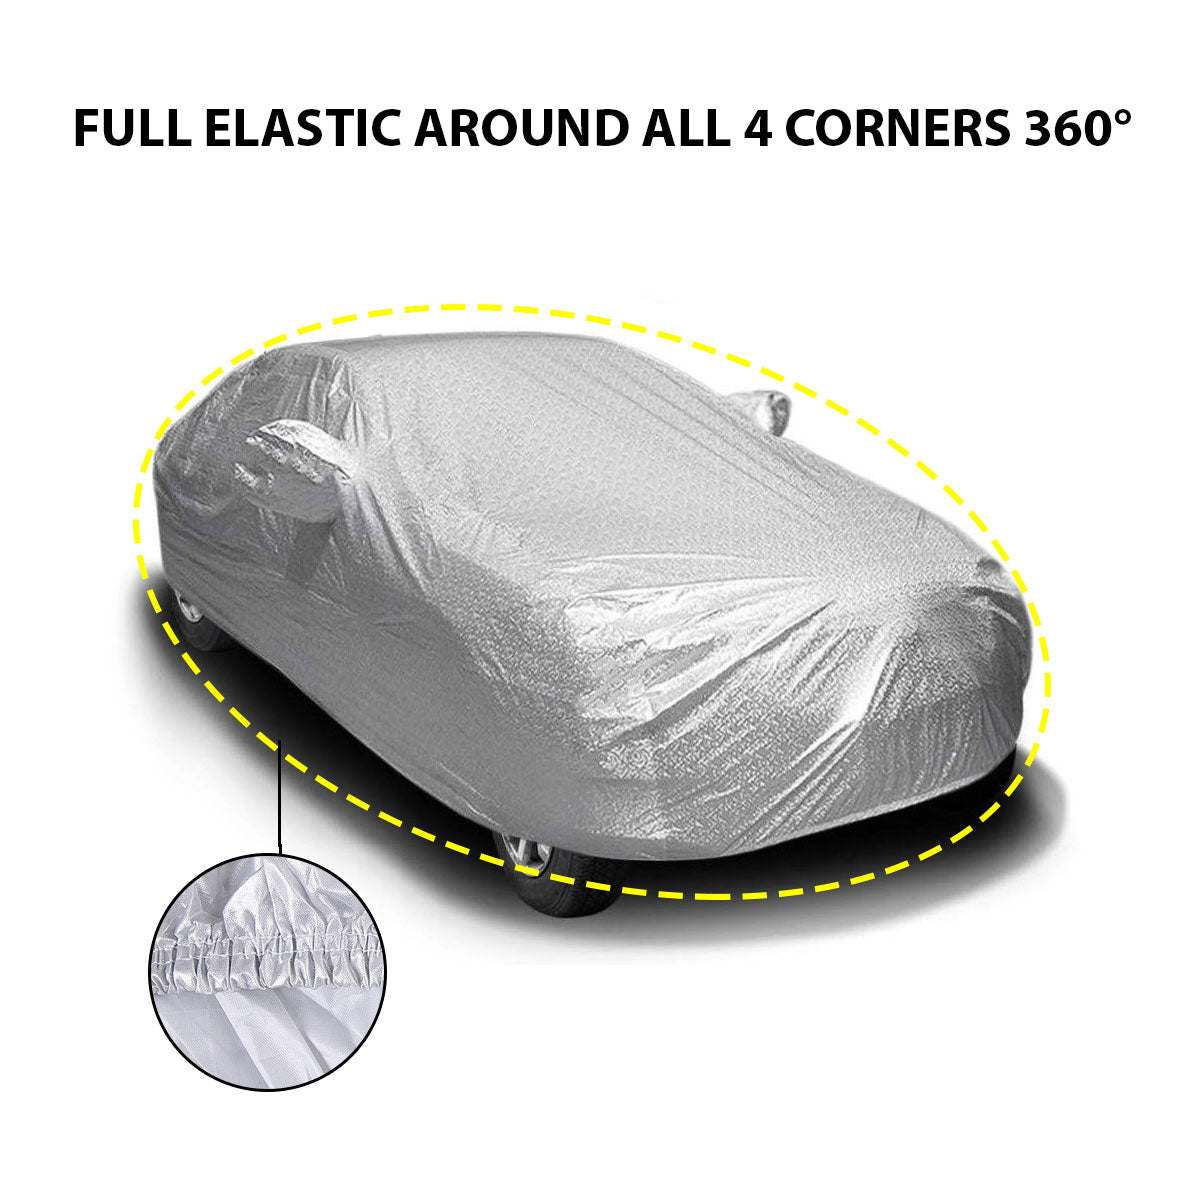 Oshotto Spyro Silver Anti Reflective, dustproof and Water Proof Car Body Cover with Mirror Pockets For Range Rover Evoque